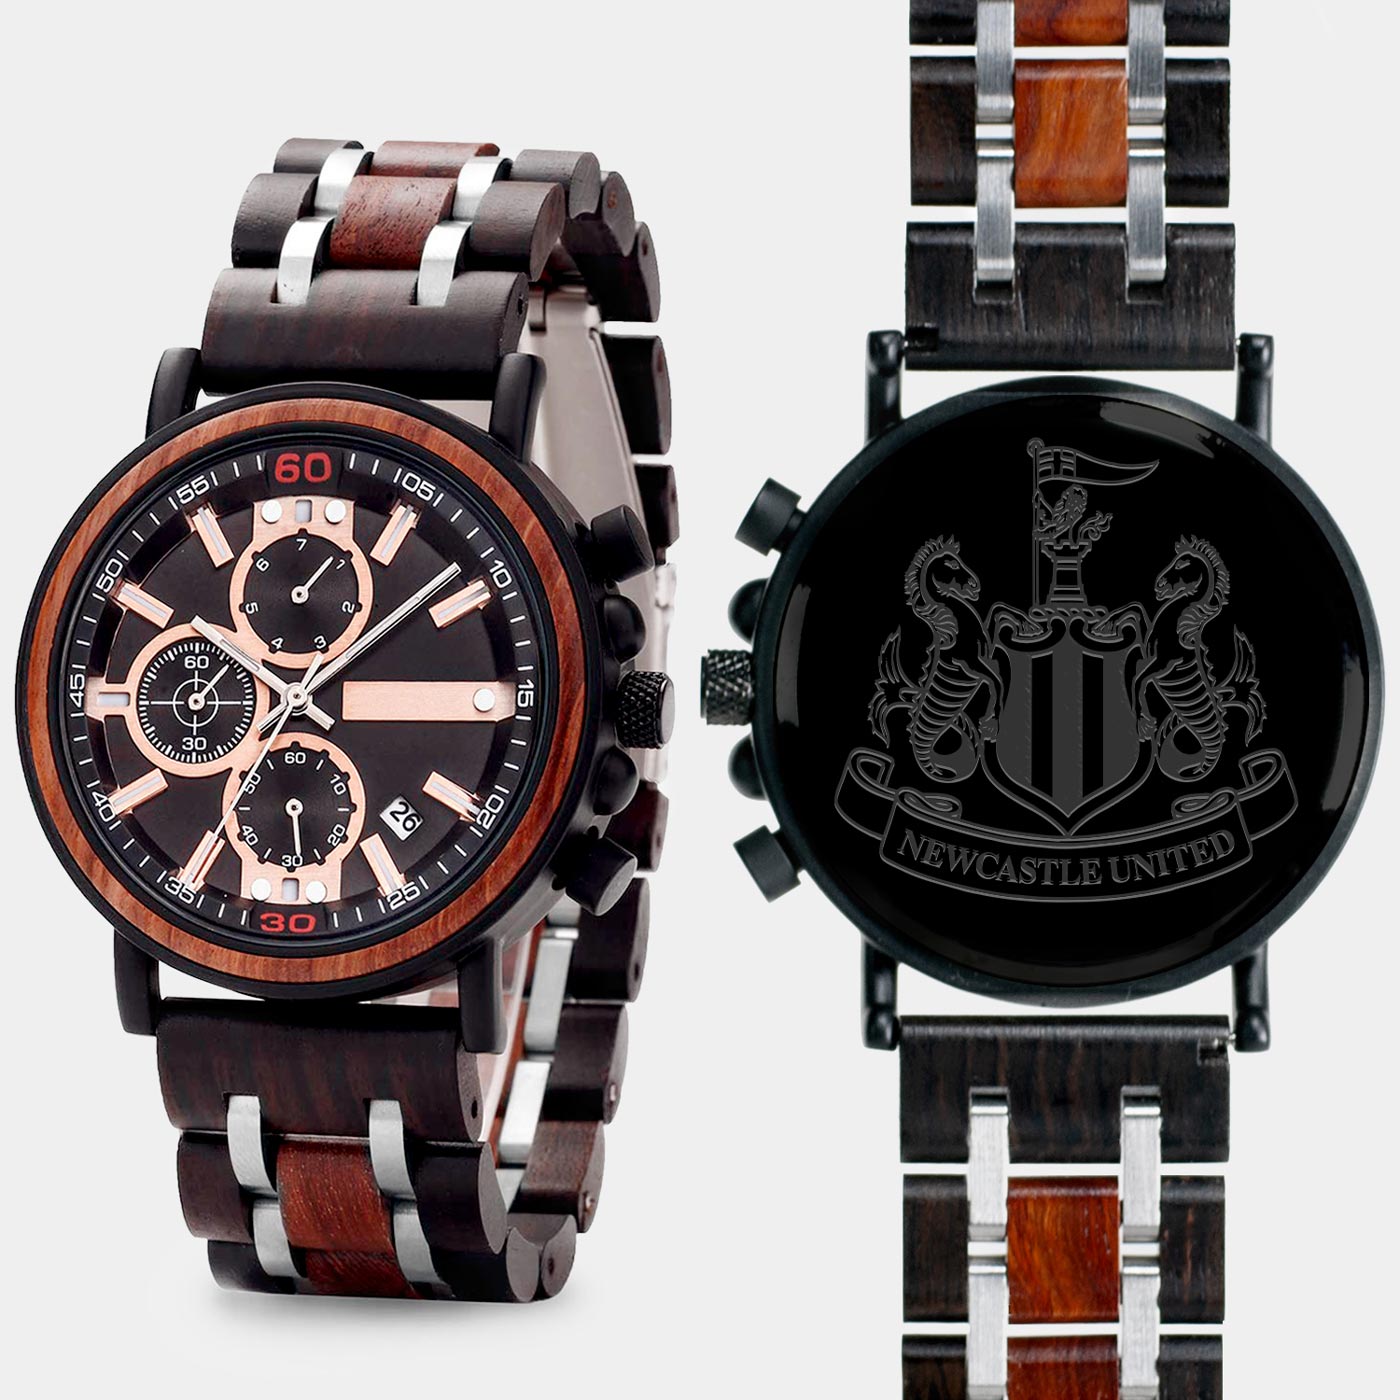 Newcastle United F.C. Mens Wrist Watch  - Personalized Newcastle United F.C. Mens Watches - Custom Gifts For Him, Birthday Gifts, Gift For Dad - Best 2022 Newcastle United F.C. Christmas Gifts - Black 45mm FC Wood Watch